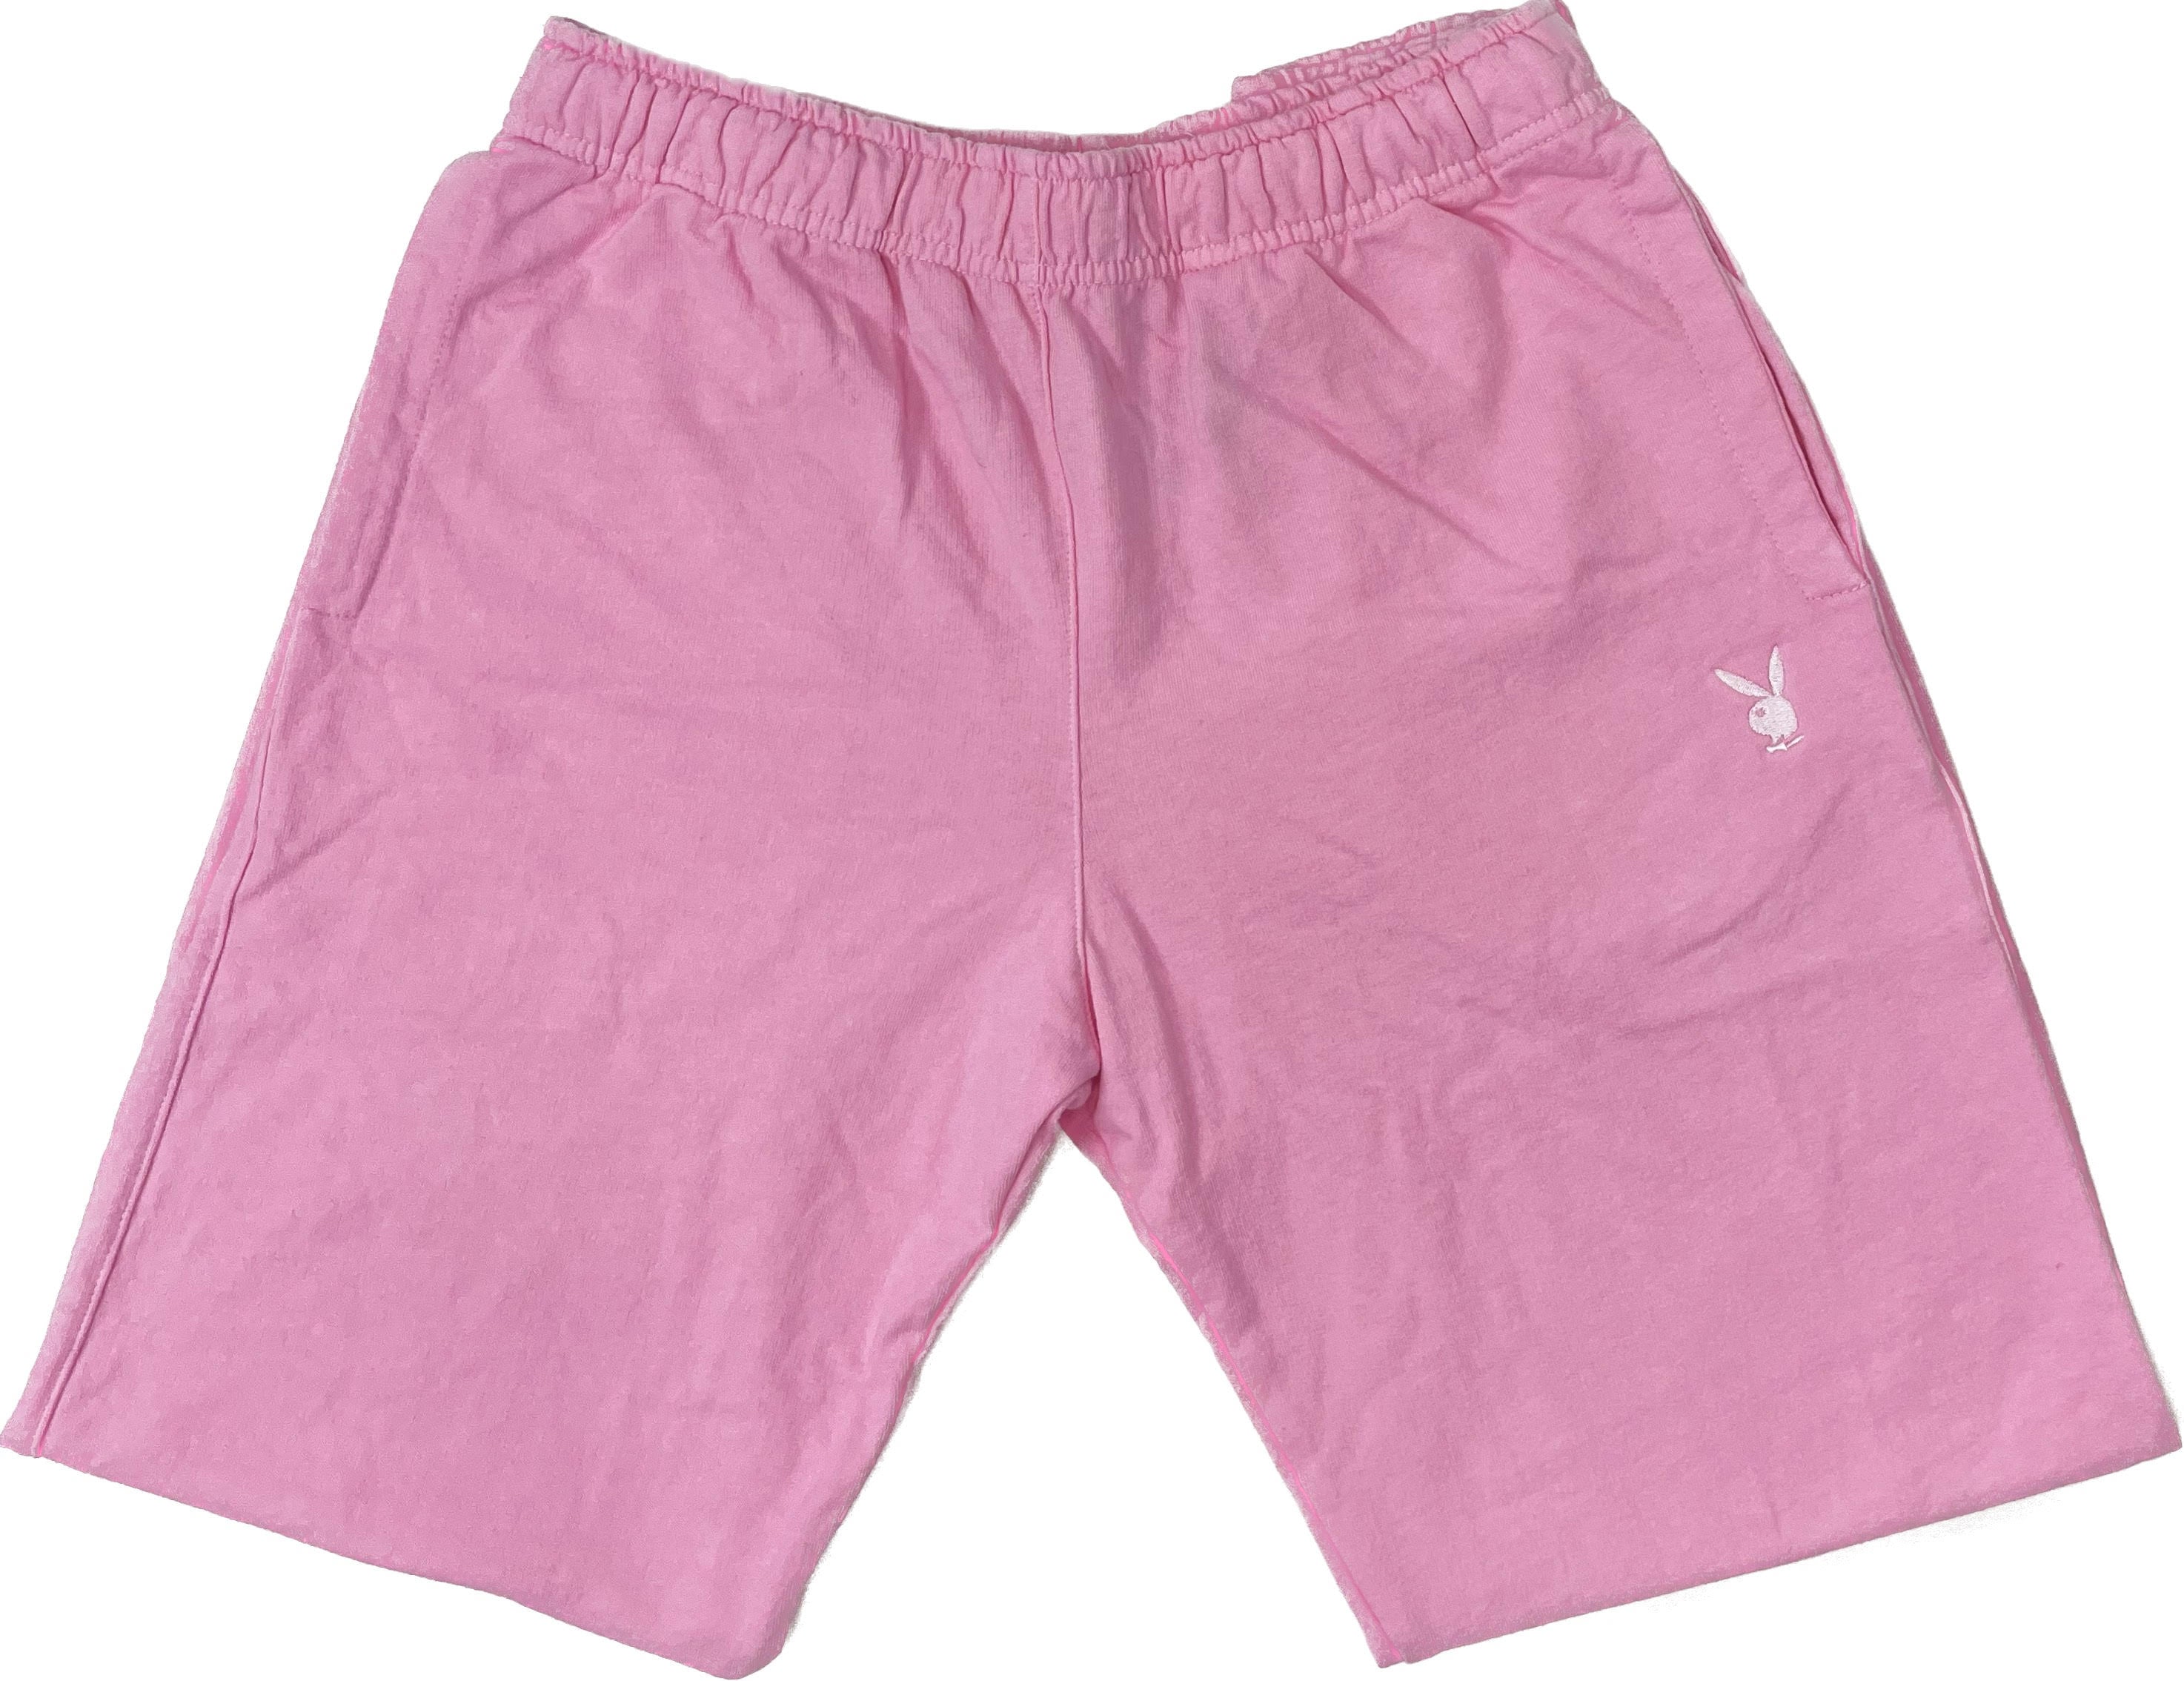 Playmate of the Year Jogger - Pink / White Print